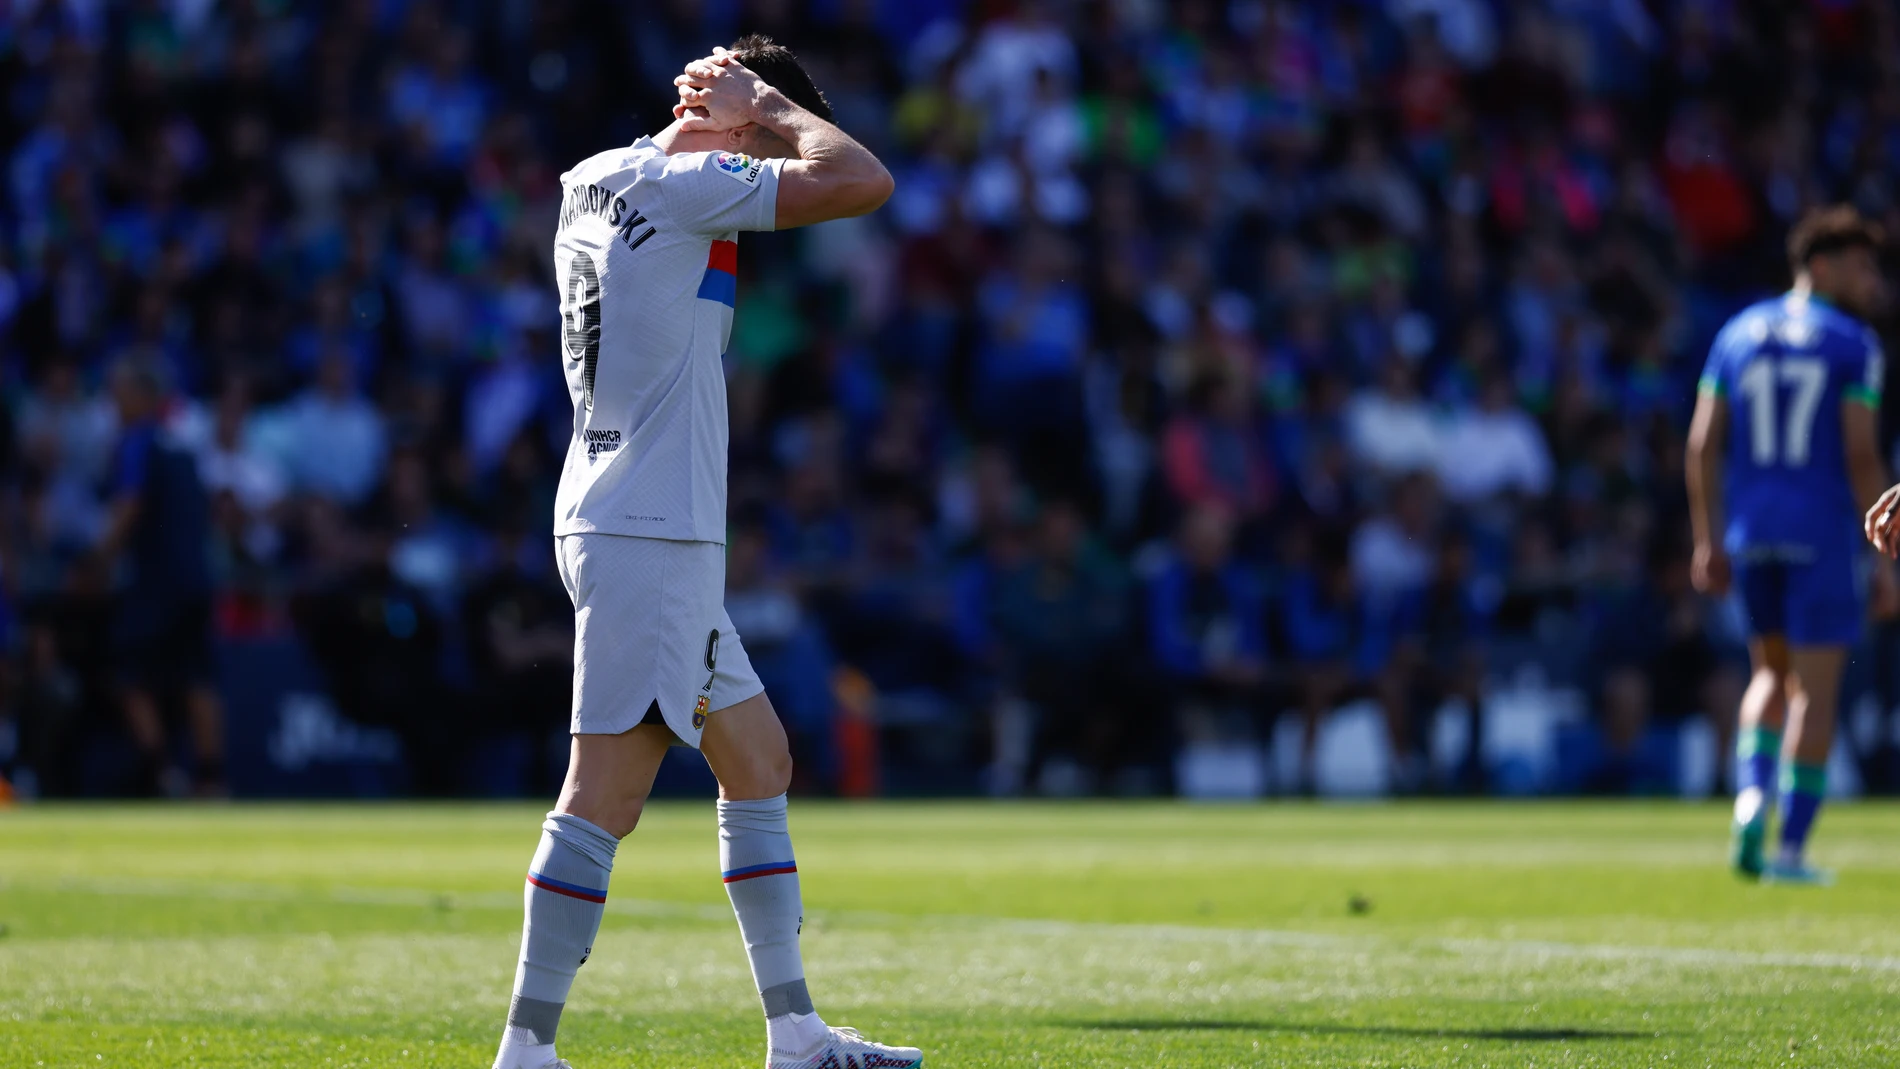 Robert Lewandowski of FC Barcelona laments during the spanish league, La Liga Santander, football match played between Getafe CF and FC Barcelona at Coliseum Alfonso Perez stadium on April 16, 2023, in Madrid, Spain.
Oscar J. Barroso / Afp7 
16/04/2023 ONLY FOR USE IN SPAIN